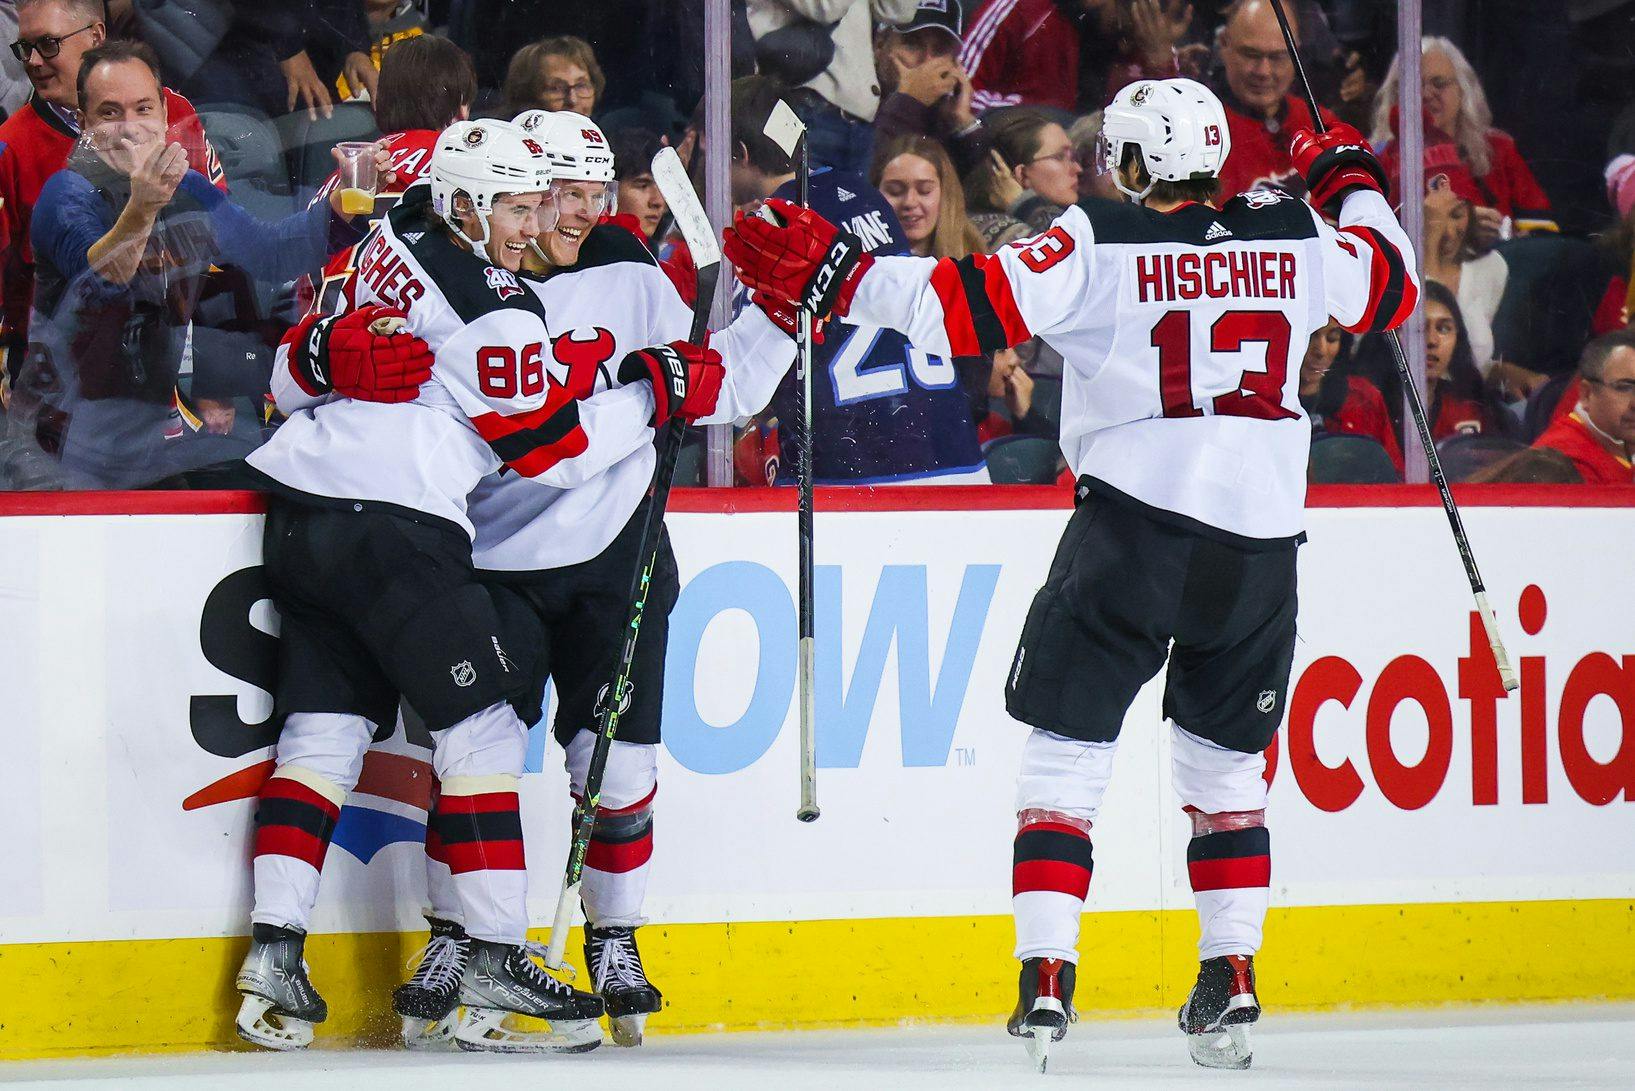 Finally, the New Jersey Devils End Losing Streak by Beating the